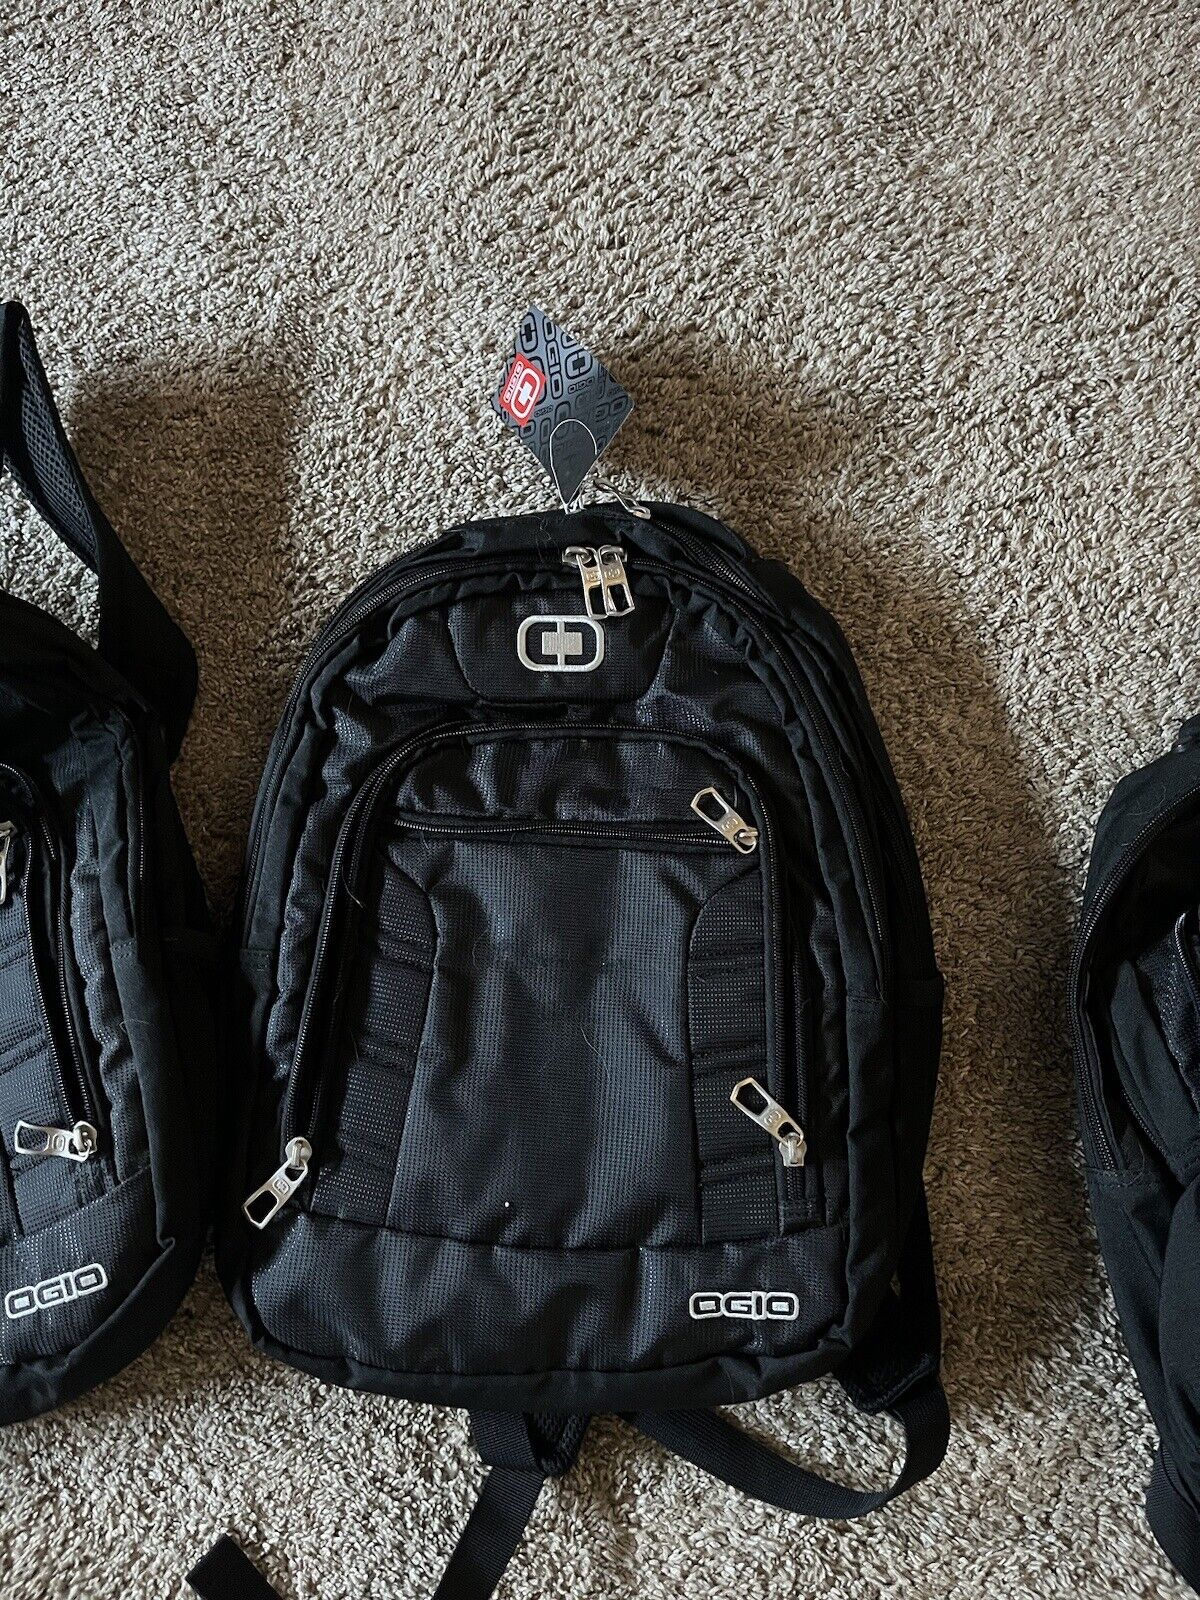 OGIO Backpacks - With Tags- 12$ Per Bag